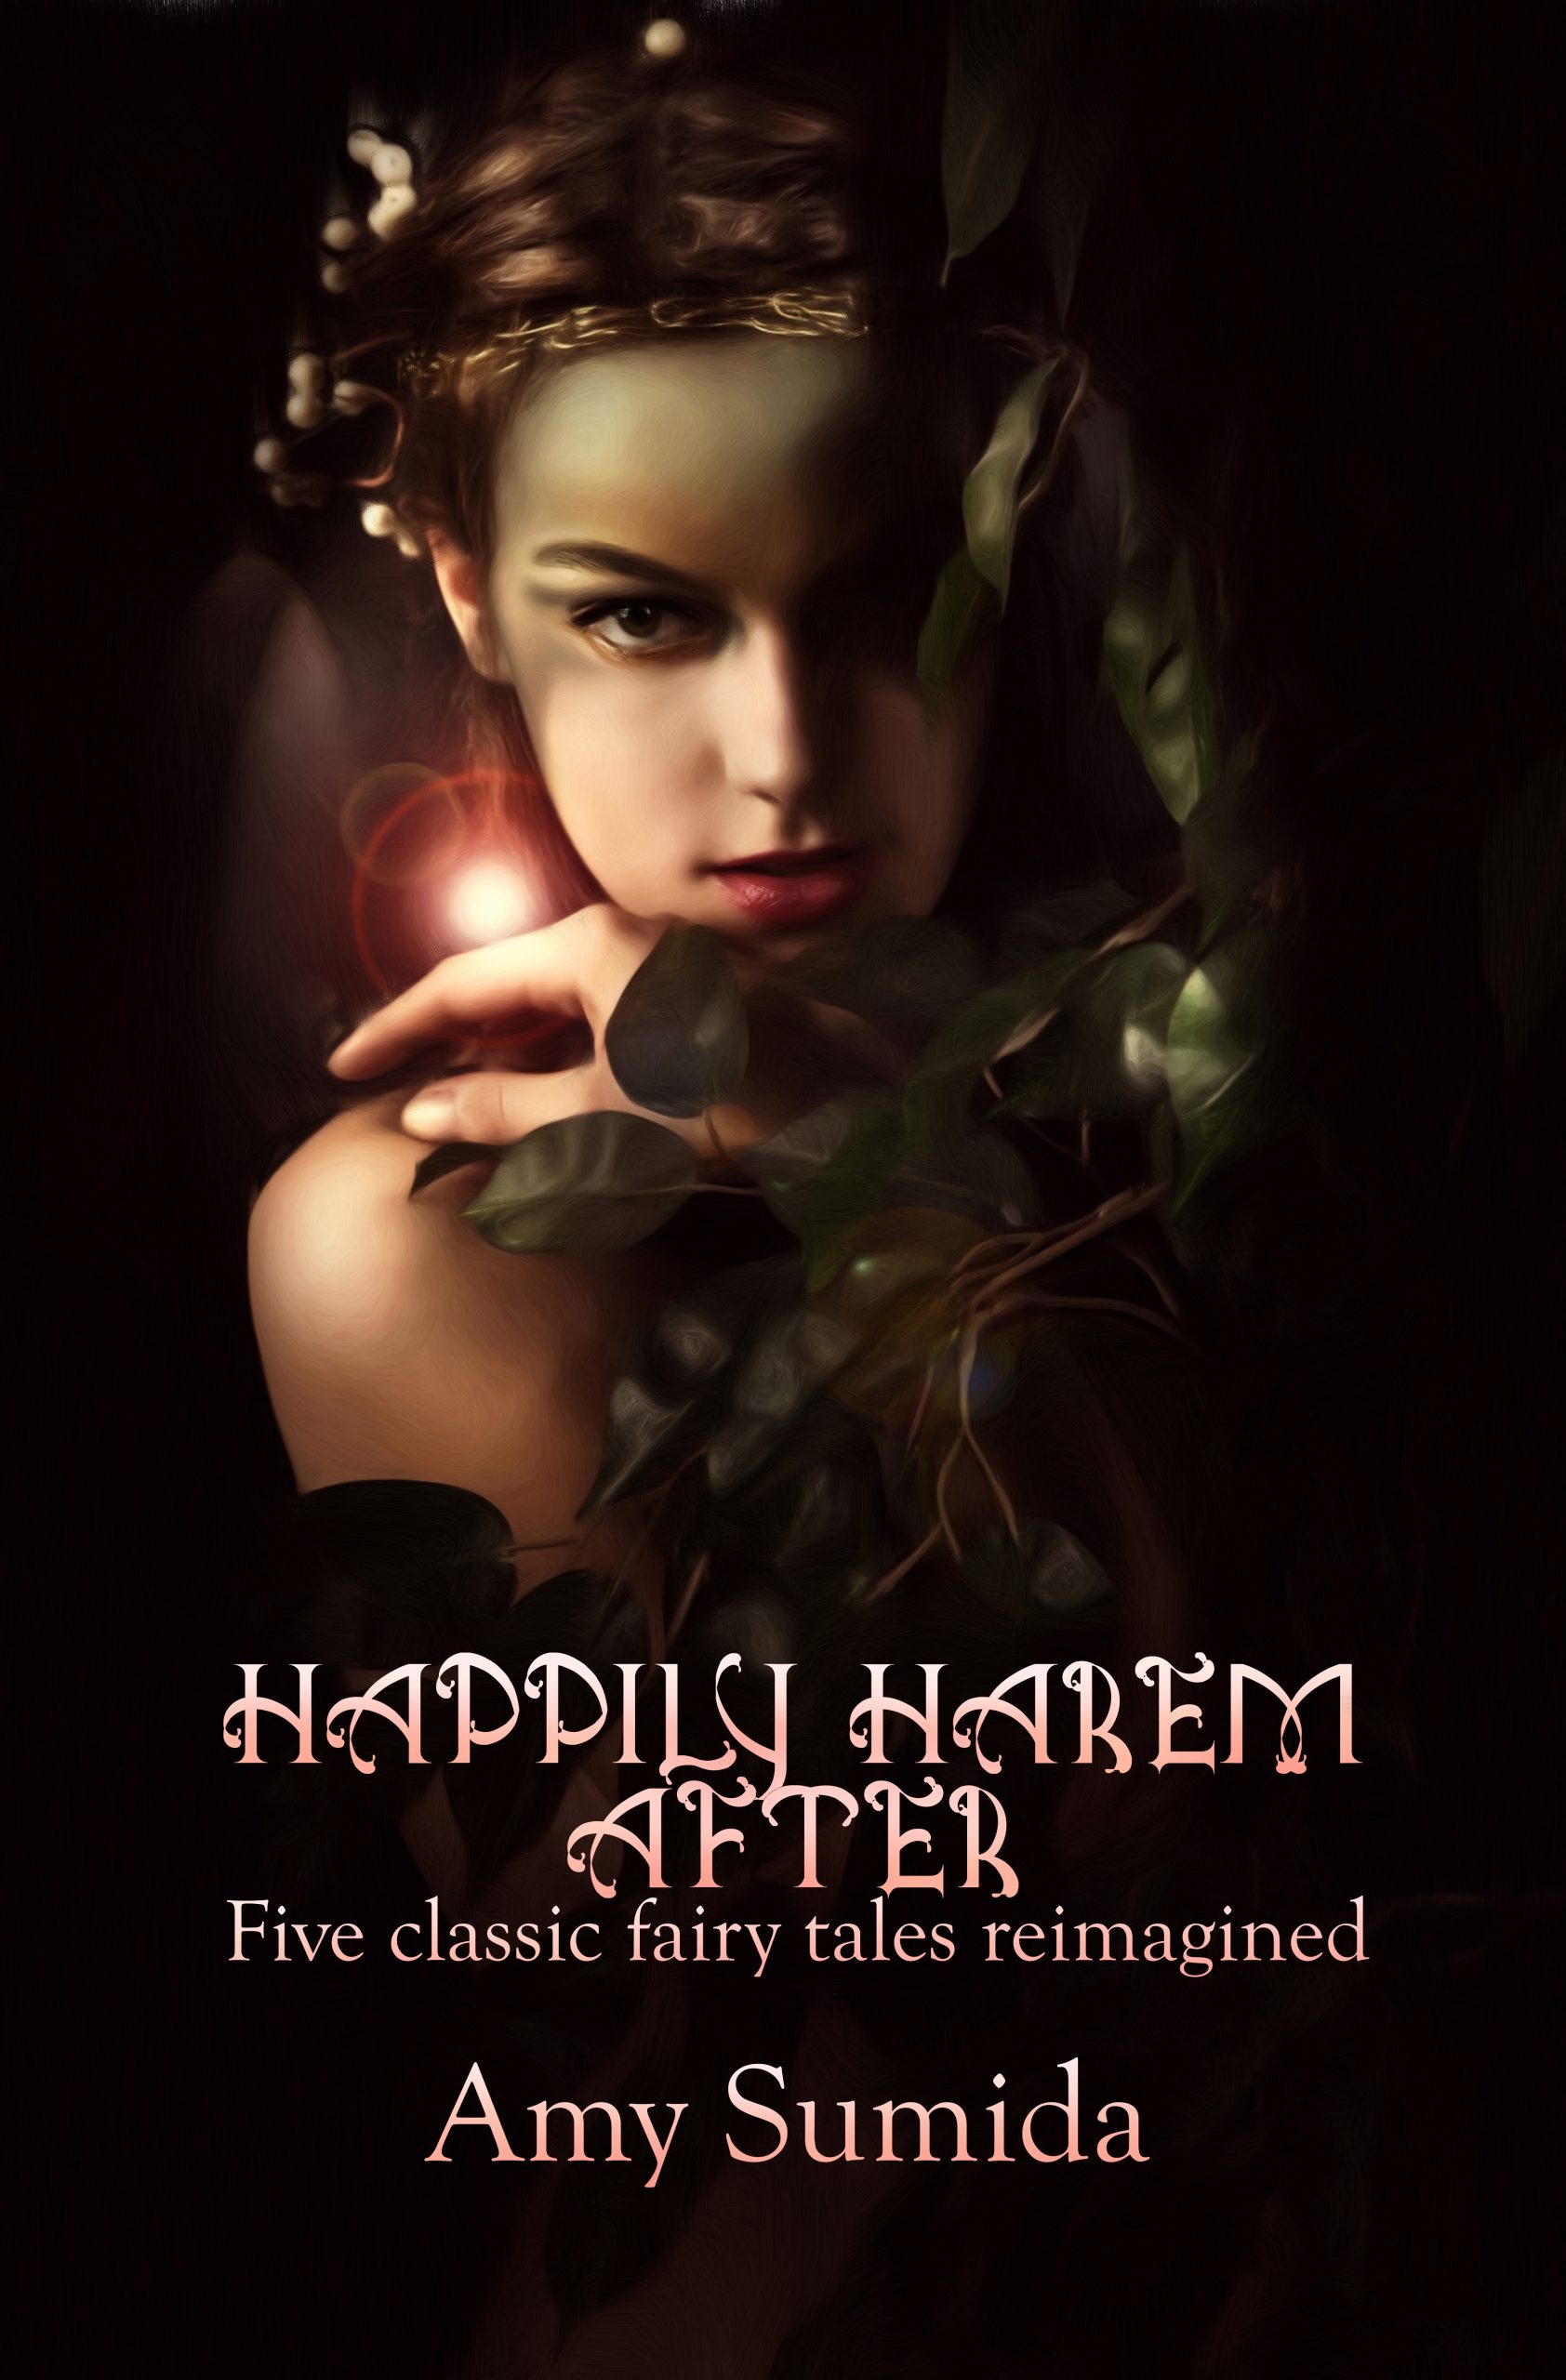 Happily Harem After book cover - Five classic fairy tales reimagined